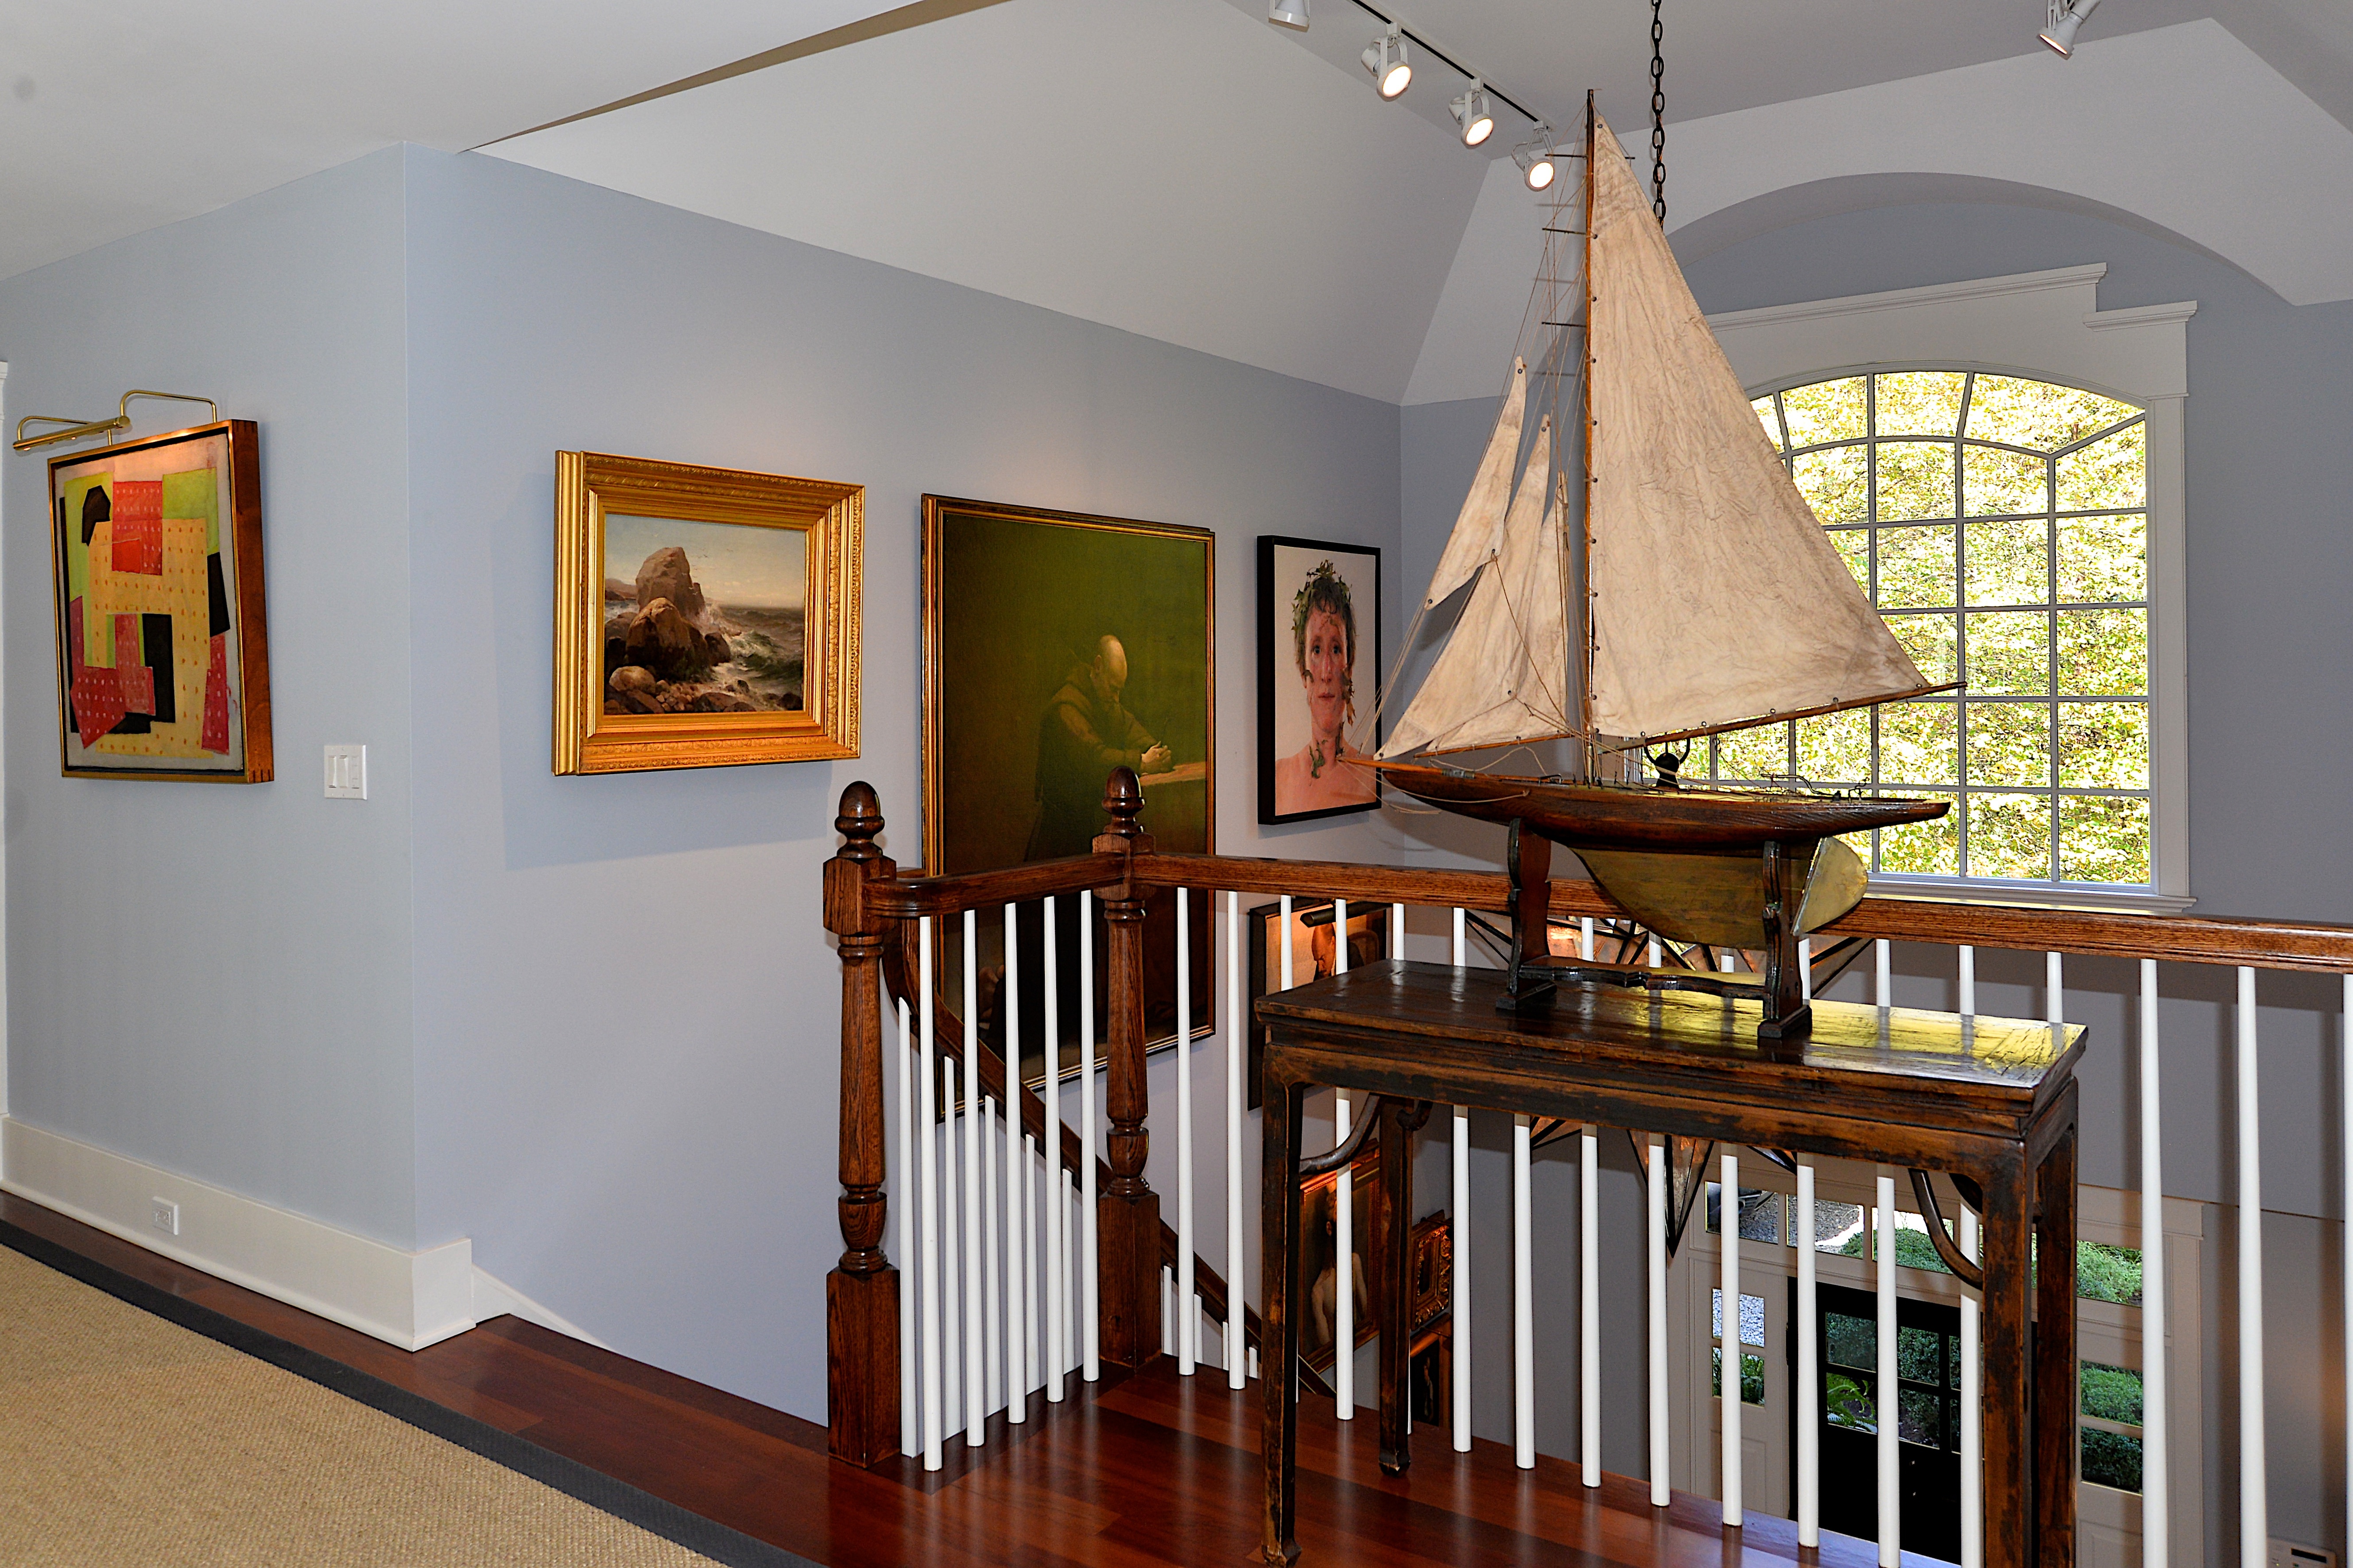 A model ship is among the antiques that adorn the home.